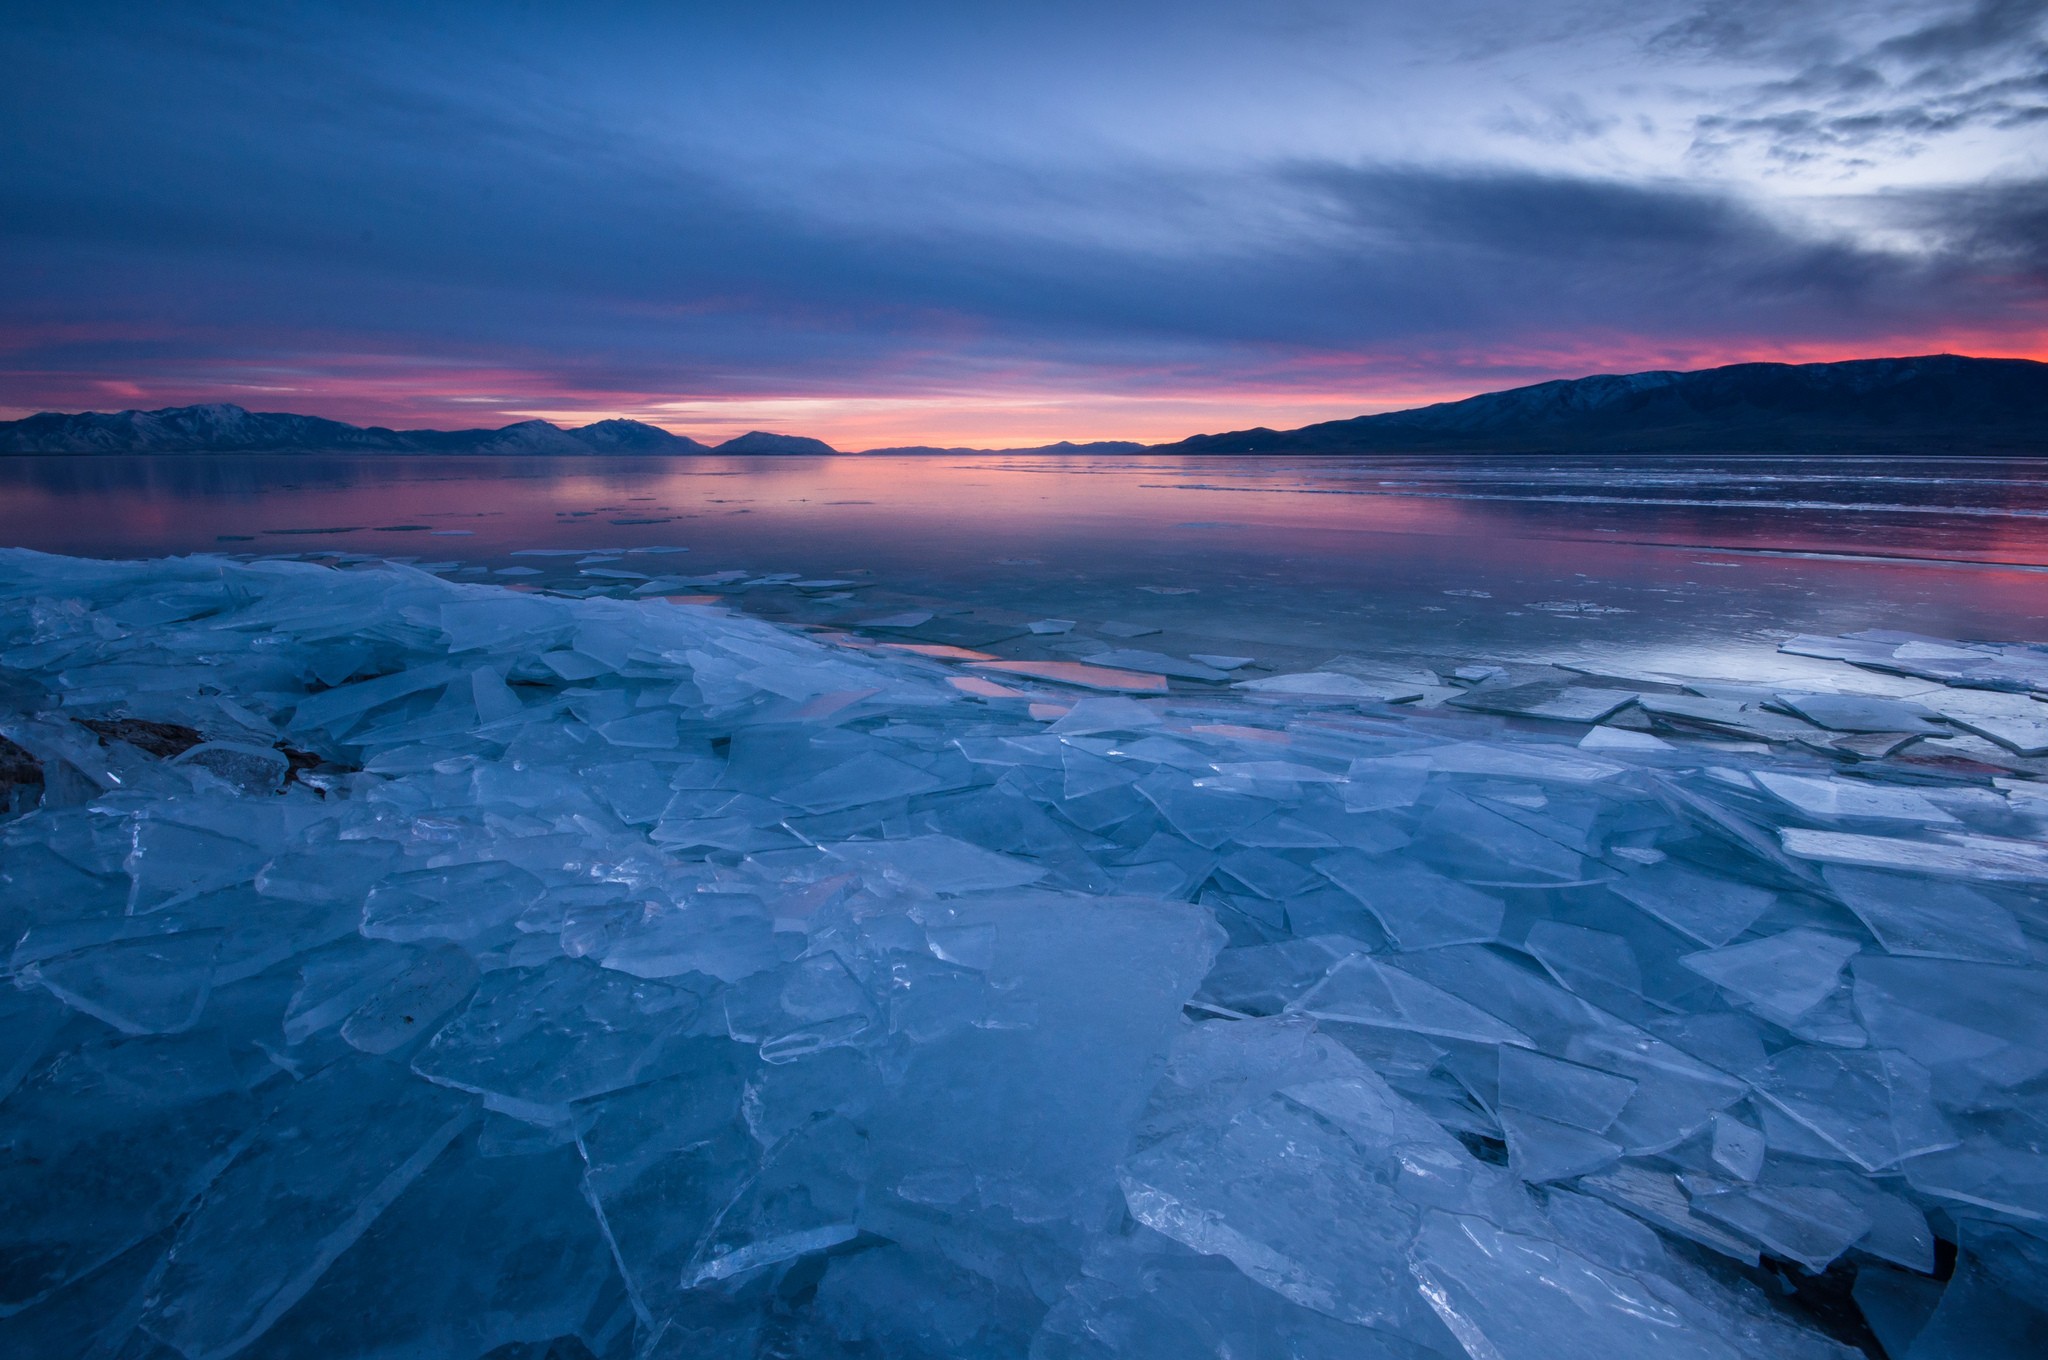 General 2048x1360 landscape sea nature ice water winter dusk blue frost cold outdoors low light